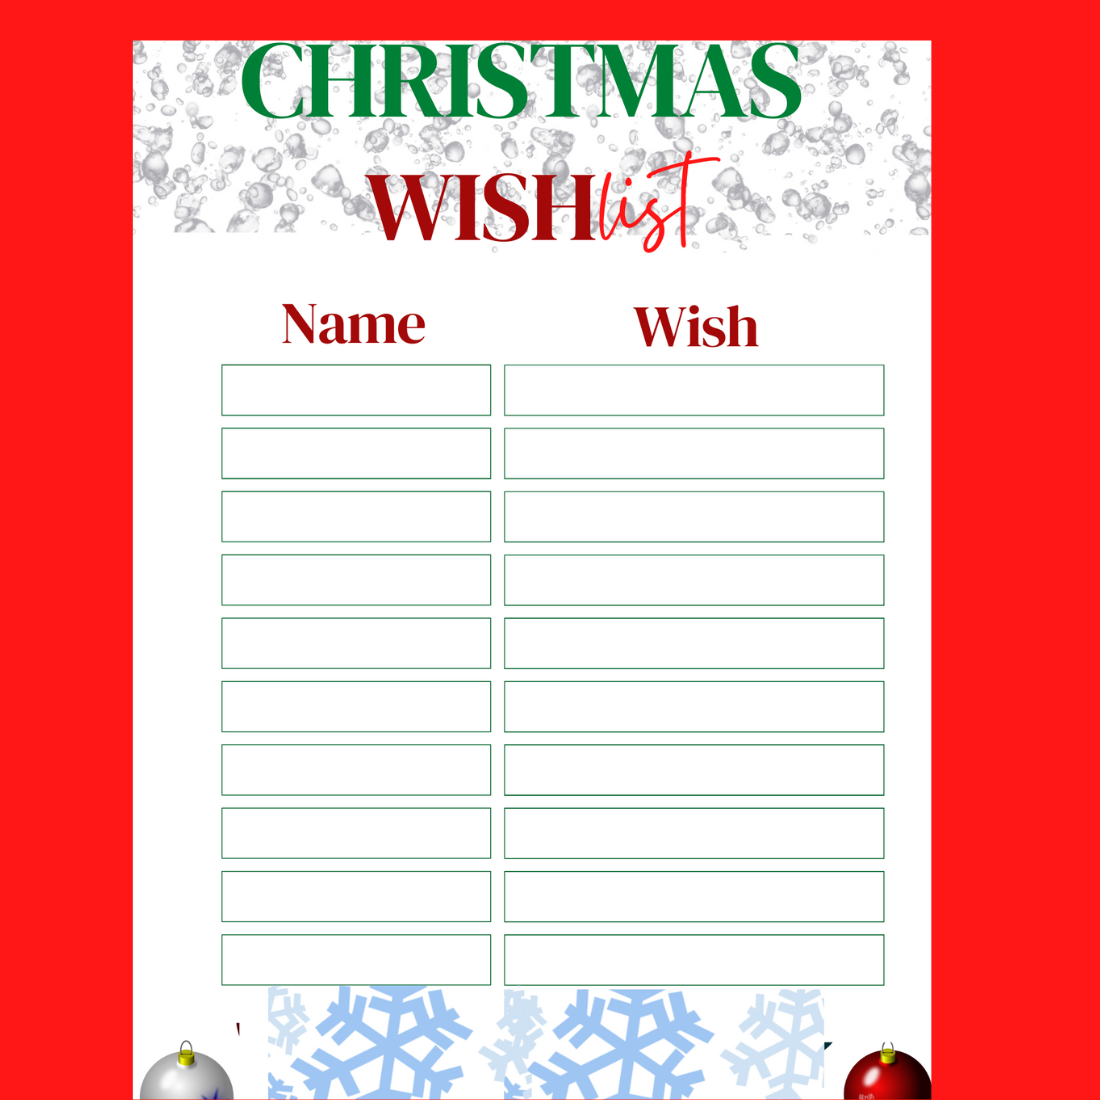 Christmas Wish List Design Template cover image.